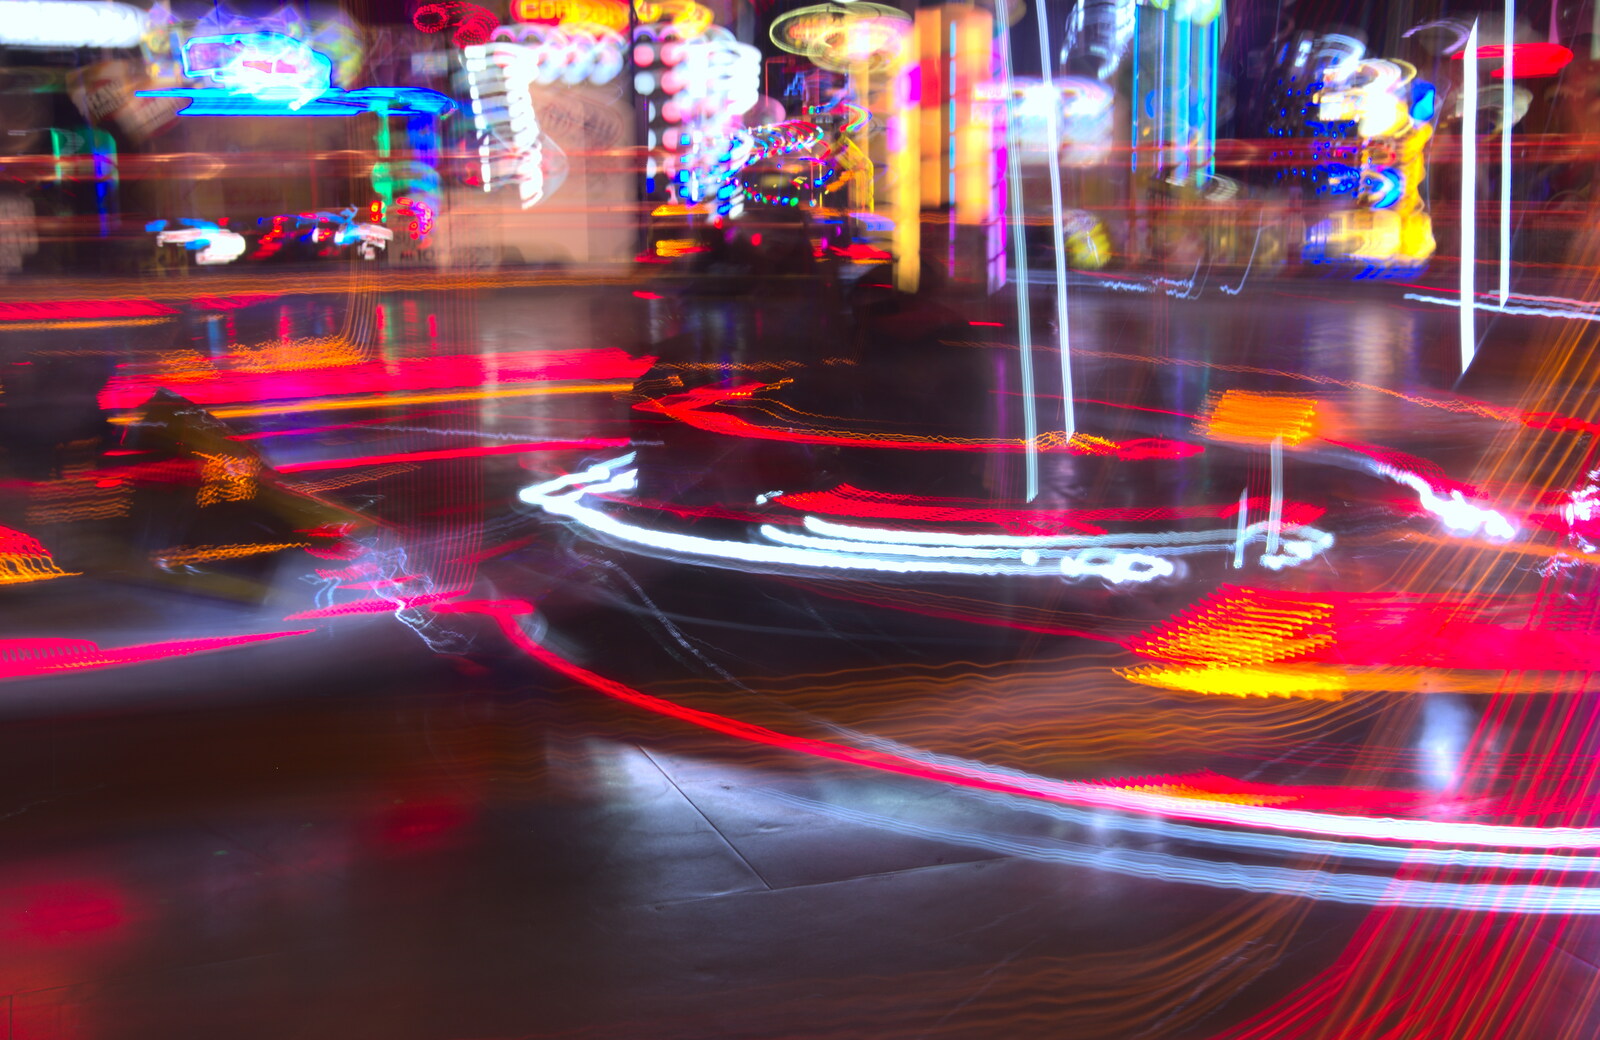 Painting with the lights of the dodgems from A Team Outing at Namco Funscape, South Bank, London - 27th March 2019